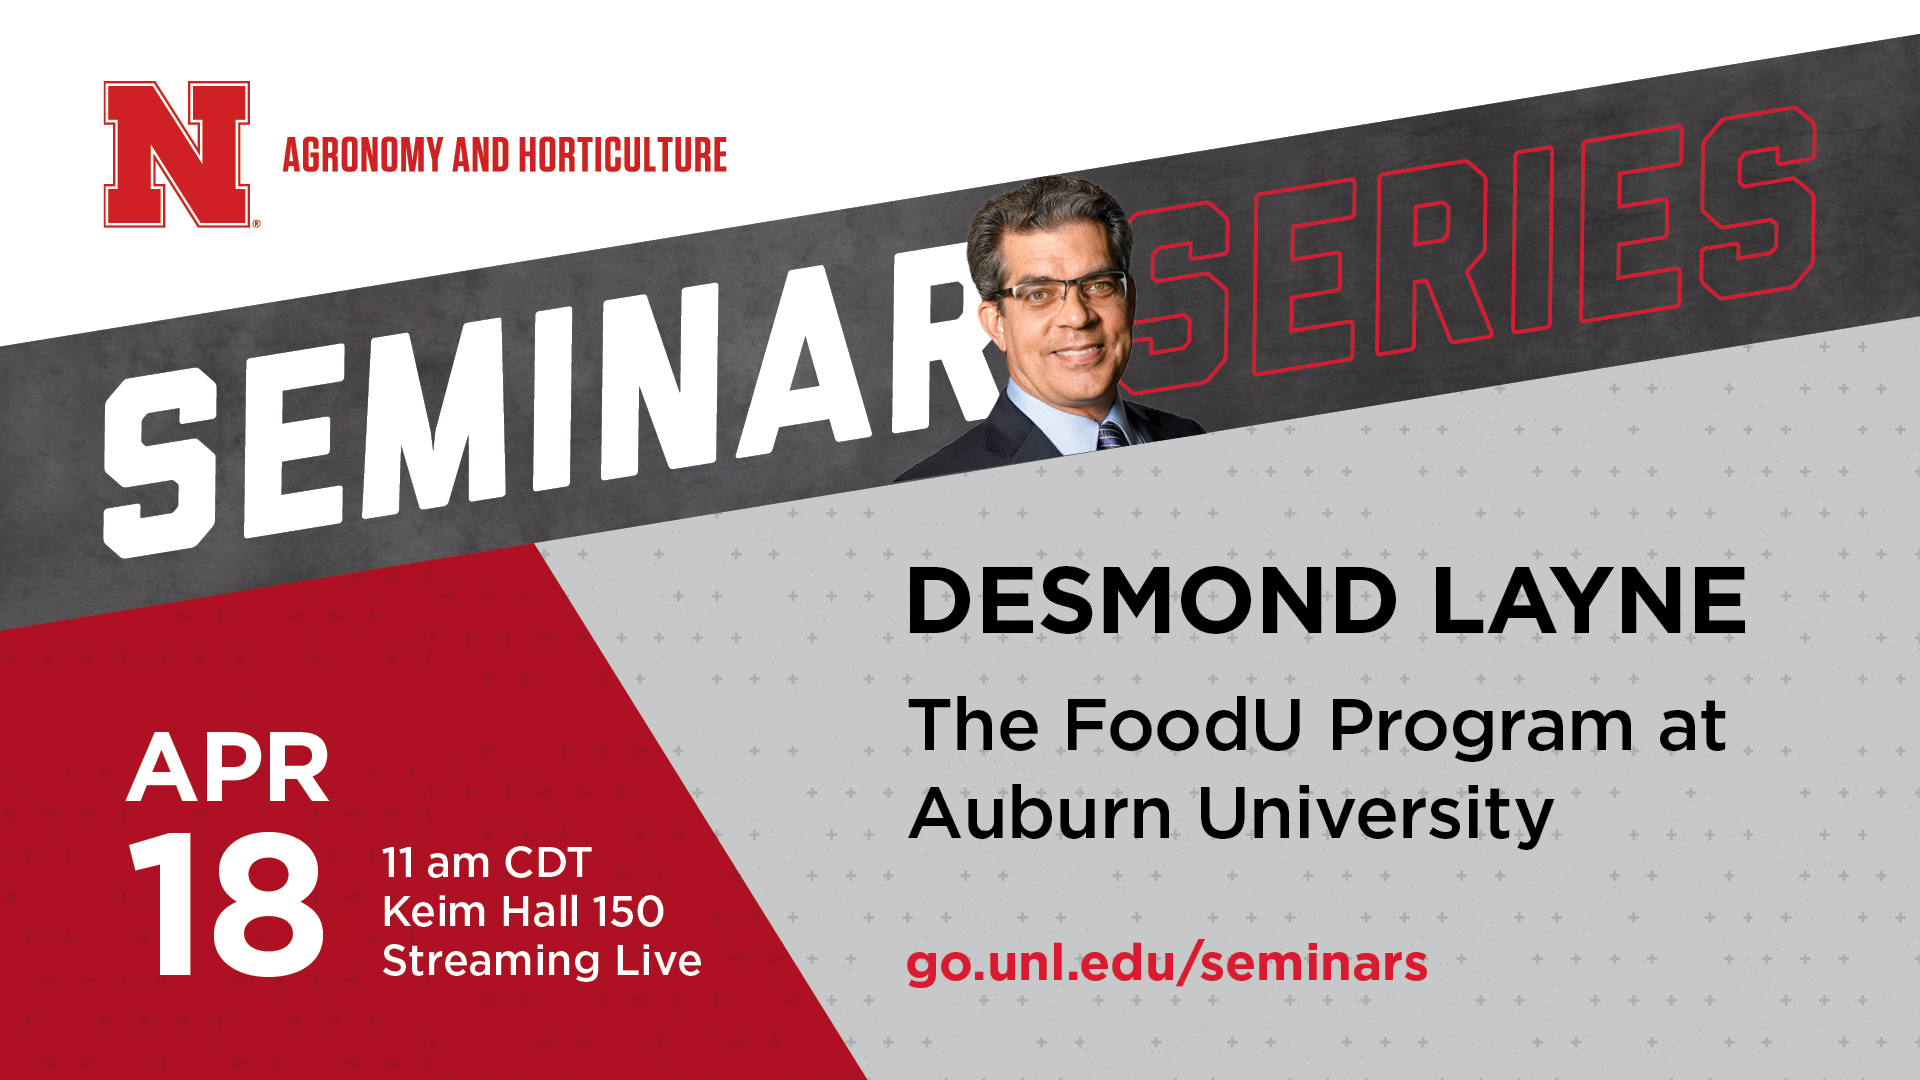 Desmond Layne, head and professor of the Department of Horticulture at Auburn University, will present the next Agronomy and Horticulture seminar on April 18.